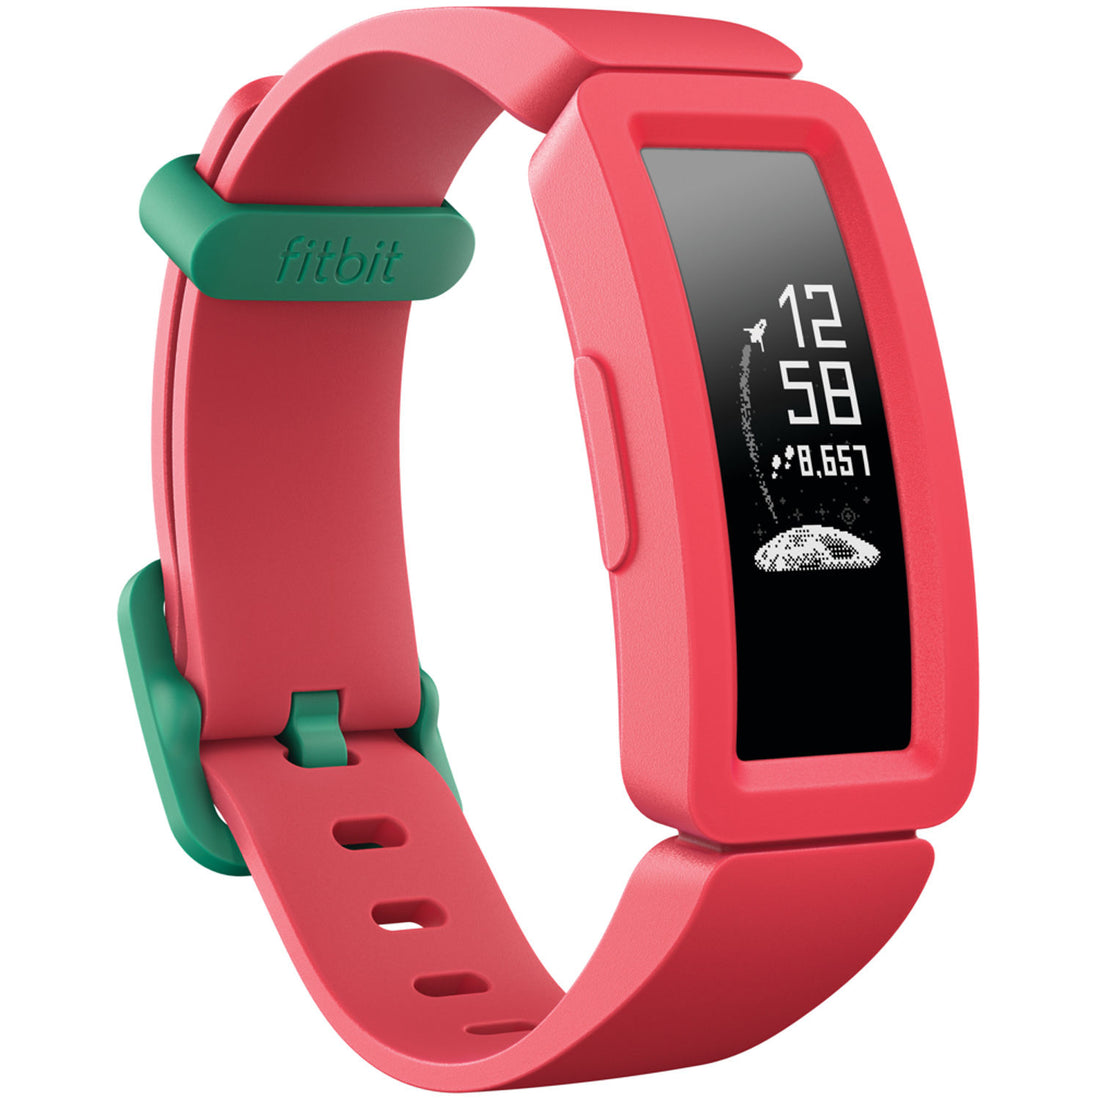 Fitbit Ace 2 Activity Tracker for Kids - Watermelon (Refurbished)